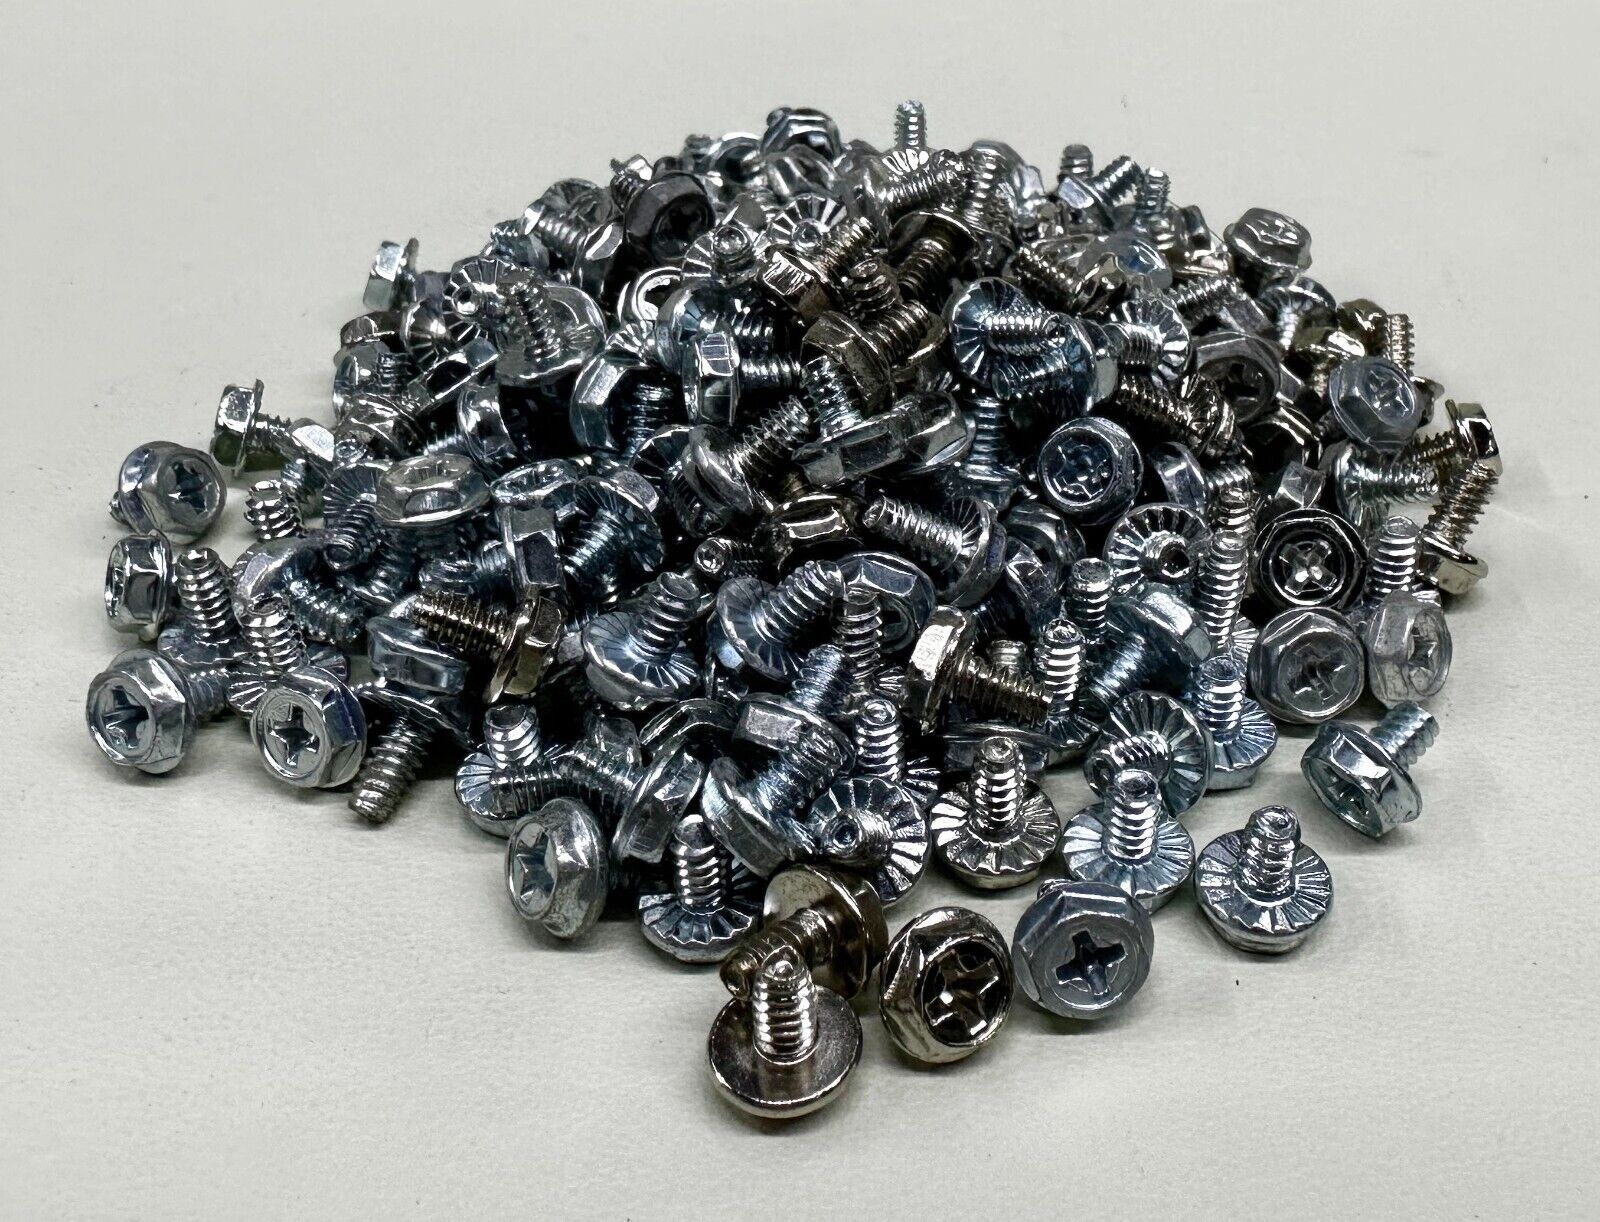 Lot of 250 Computer Chassis Case Screws - Silver - Hex #6, Philips Head